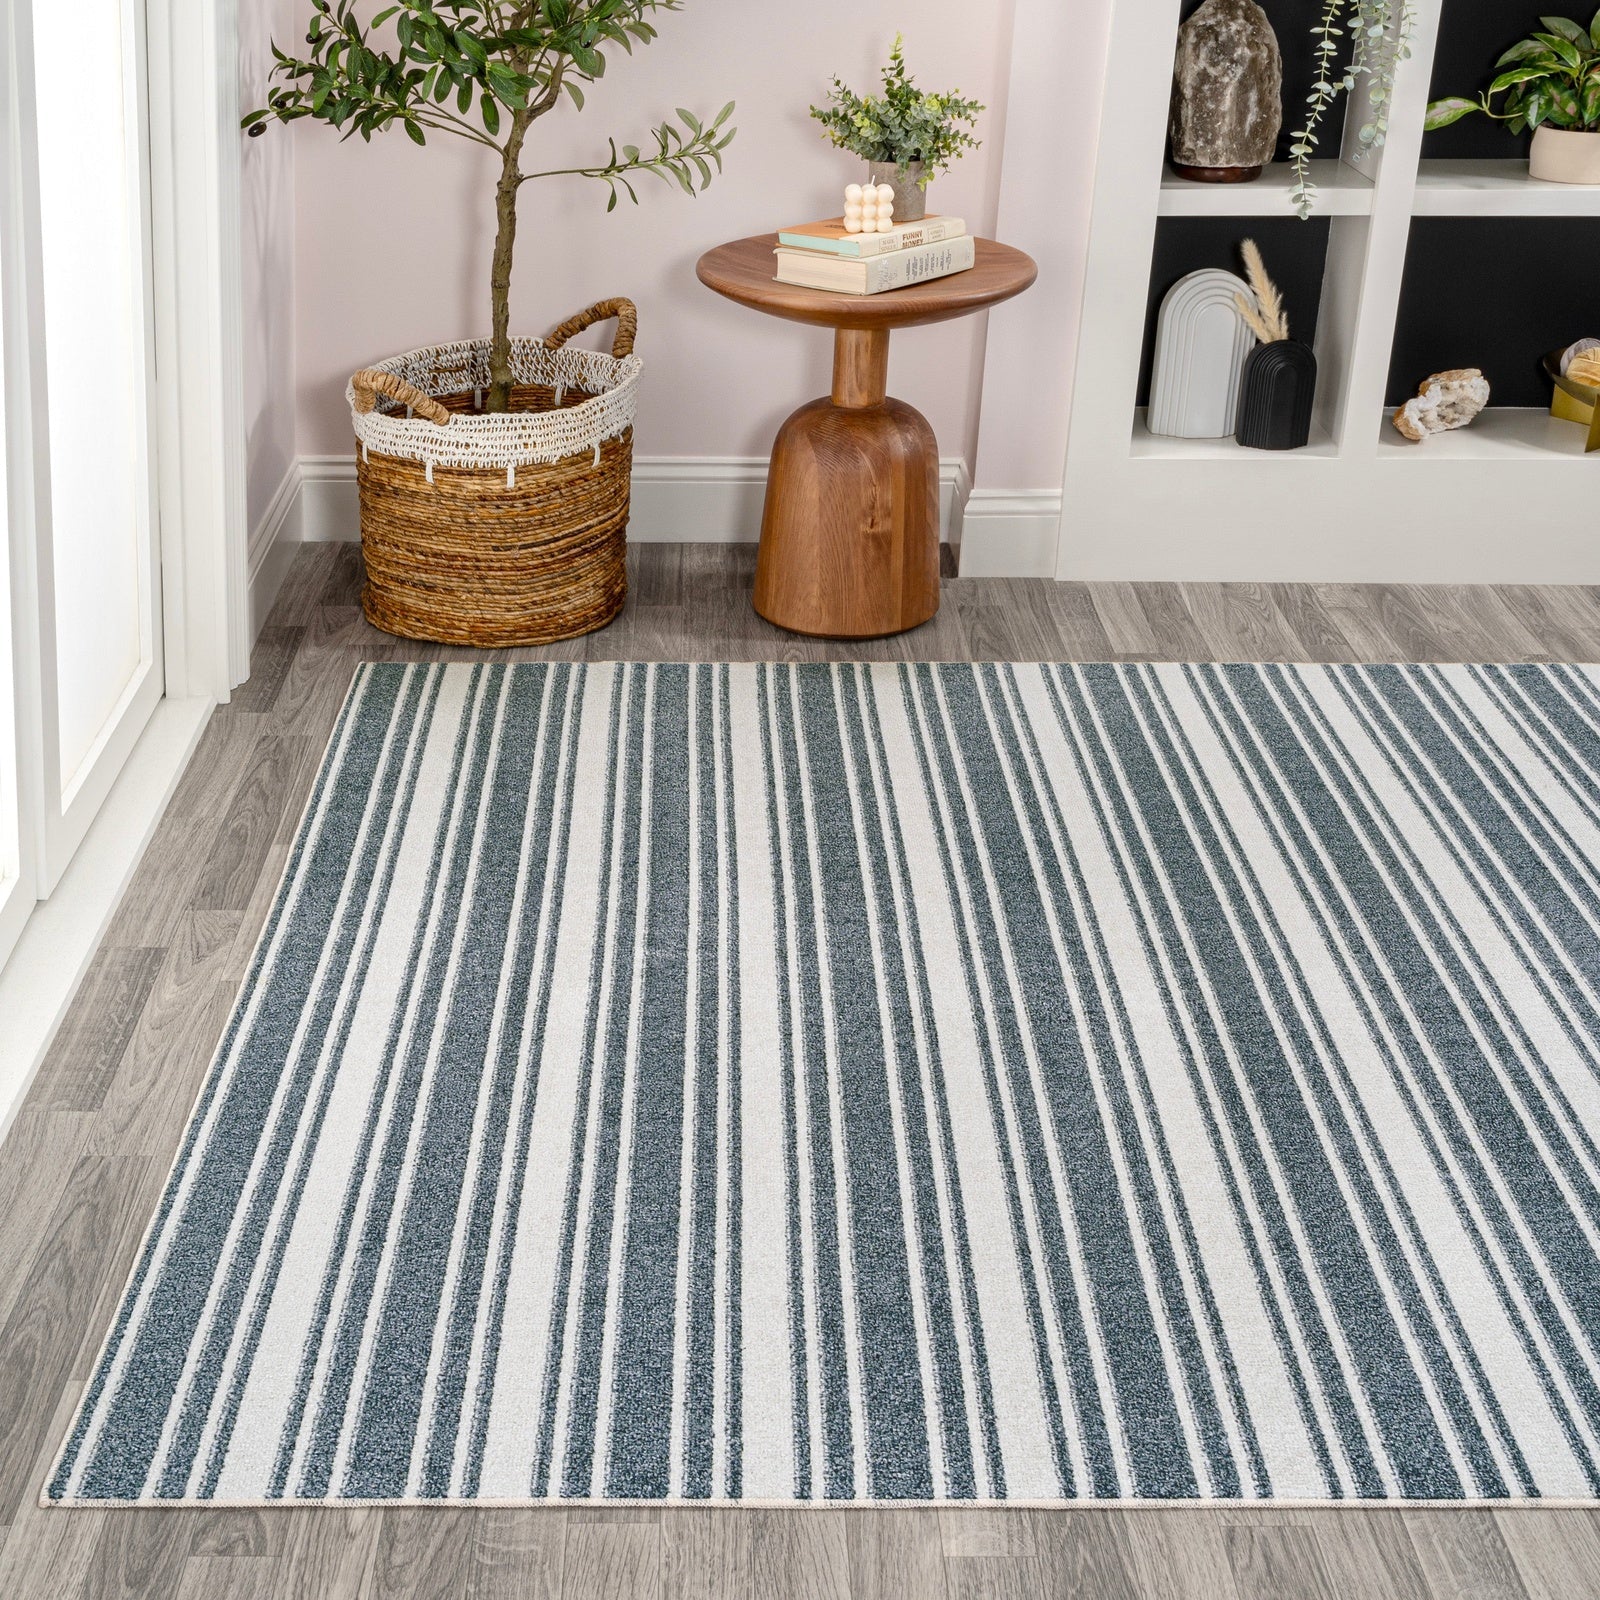 Fawning Two-Tone Striped Classic Low-Pile Machine-Washable Area Rug - Pier 1